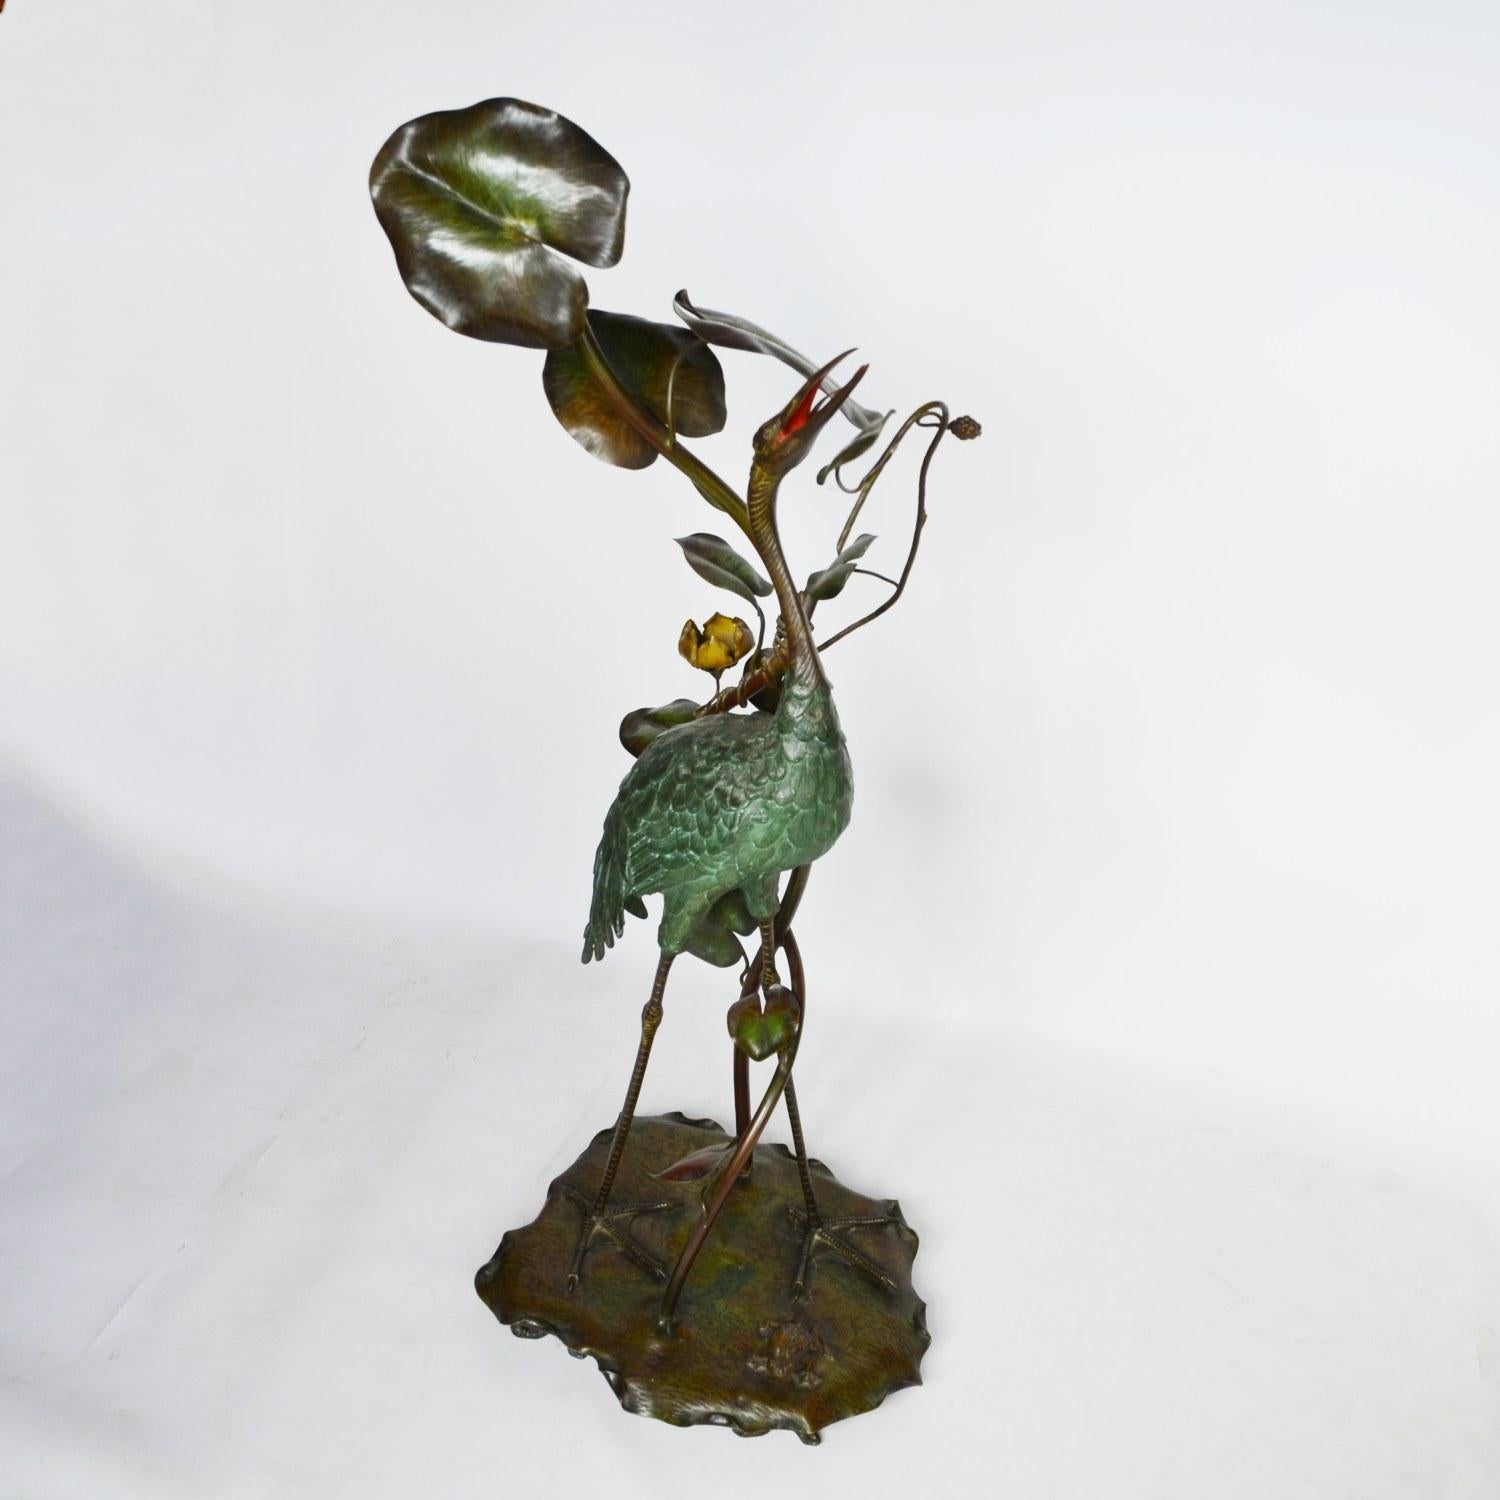 A large early 20th century, Japanese bronze model of a Stork. Cold painted and patinated bronze, with flower and plant detail and a bronze Frog to base. Unsigned.

Dimensions: H 125cm, W 45cm, D 36cm

Origin: Japanese

Date: circa 1910

Item